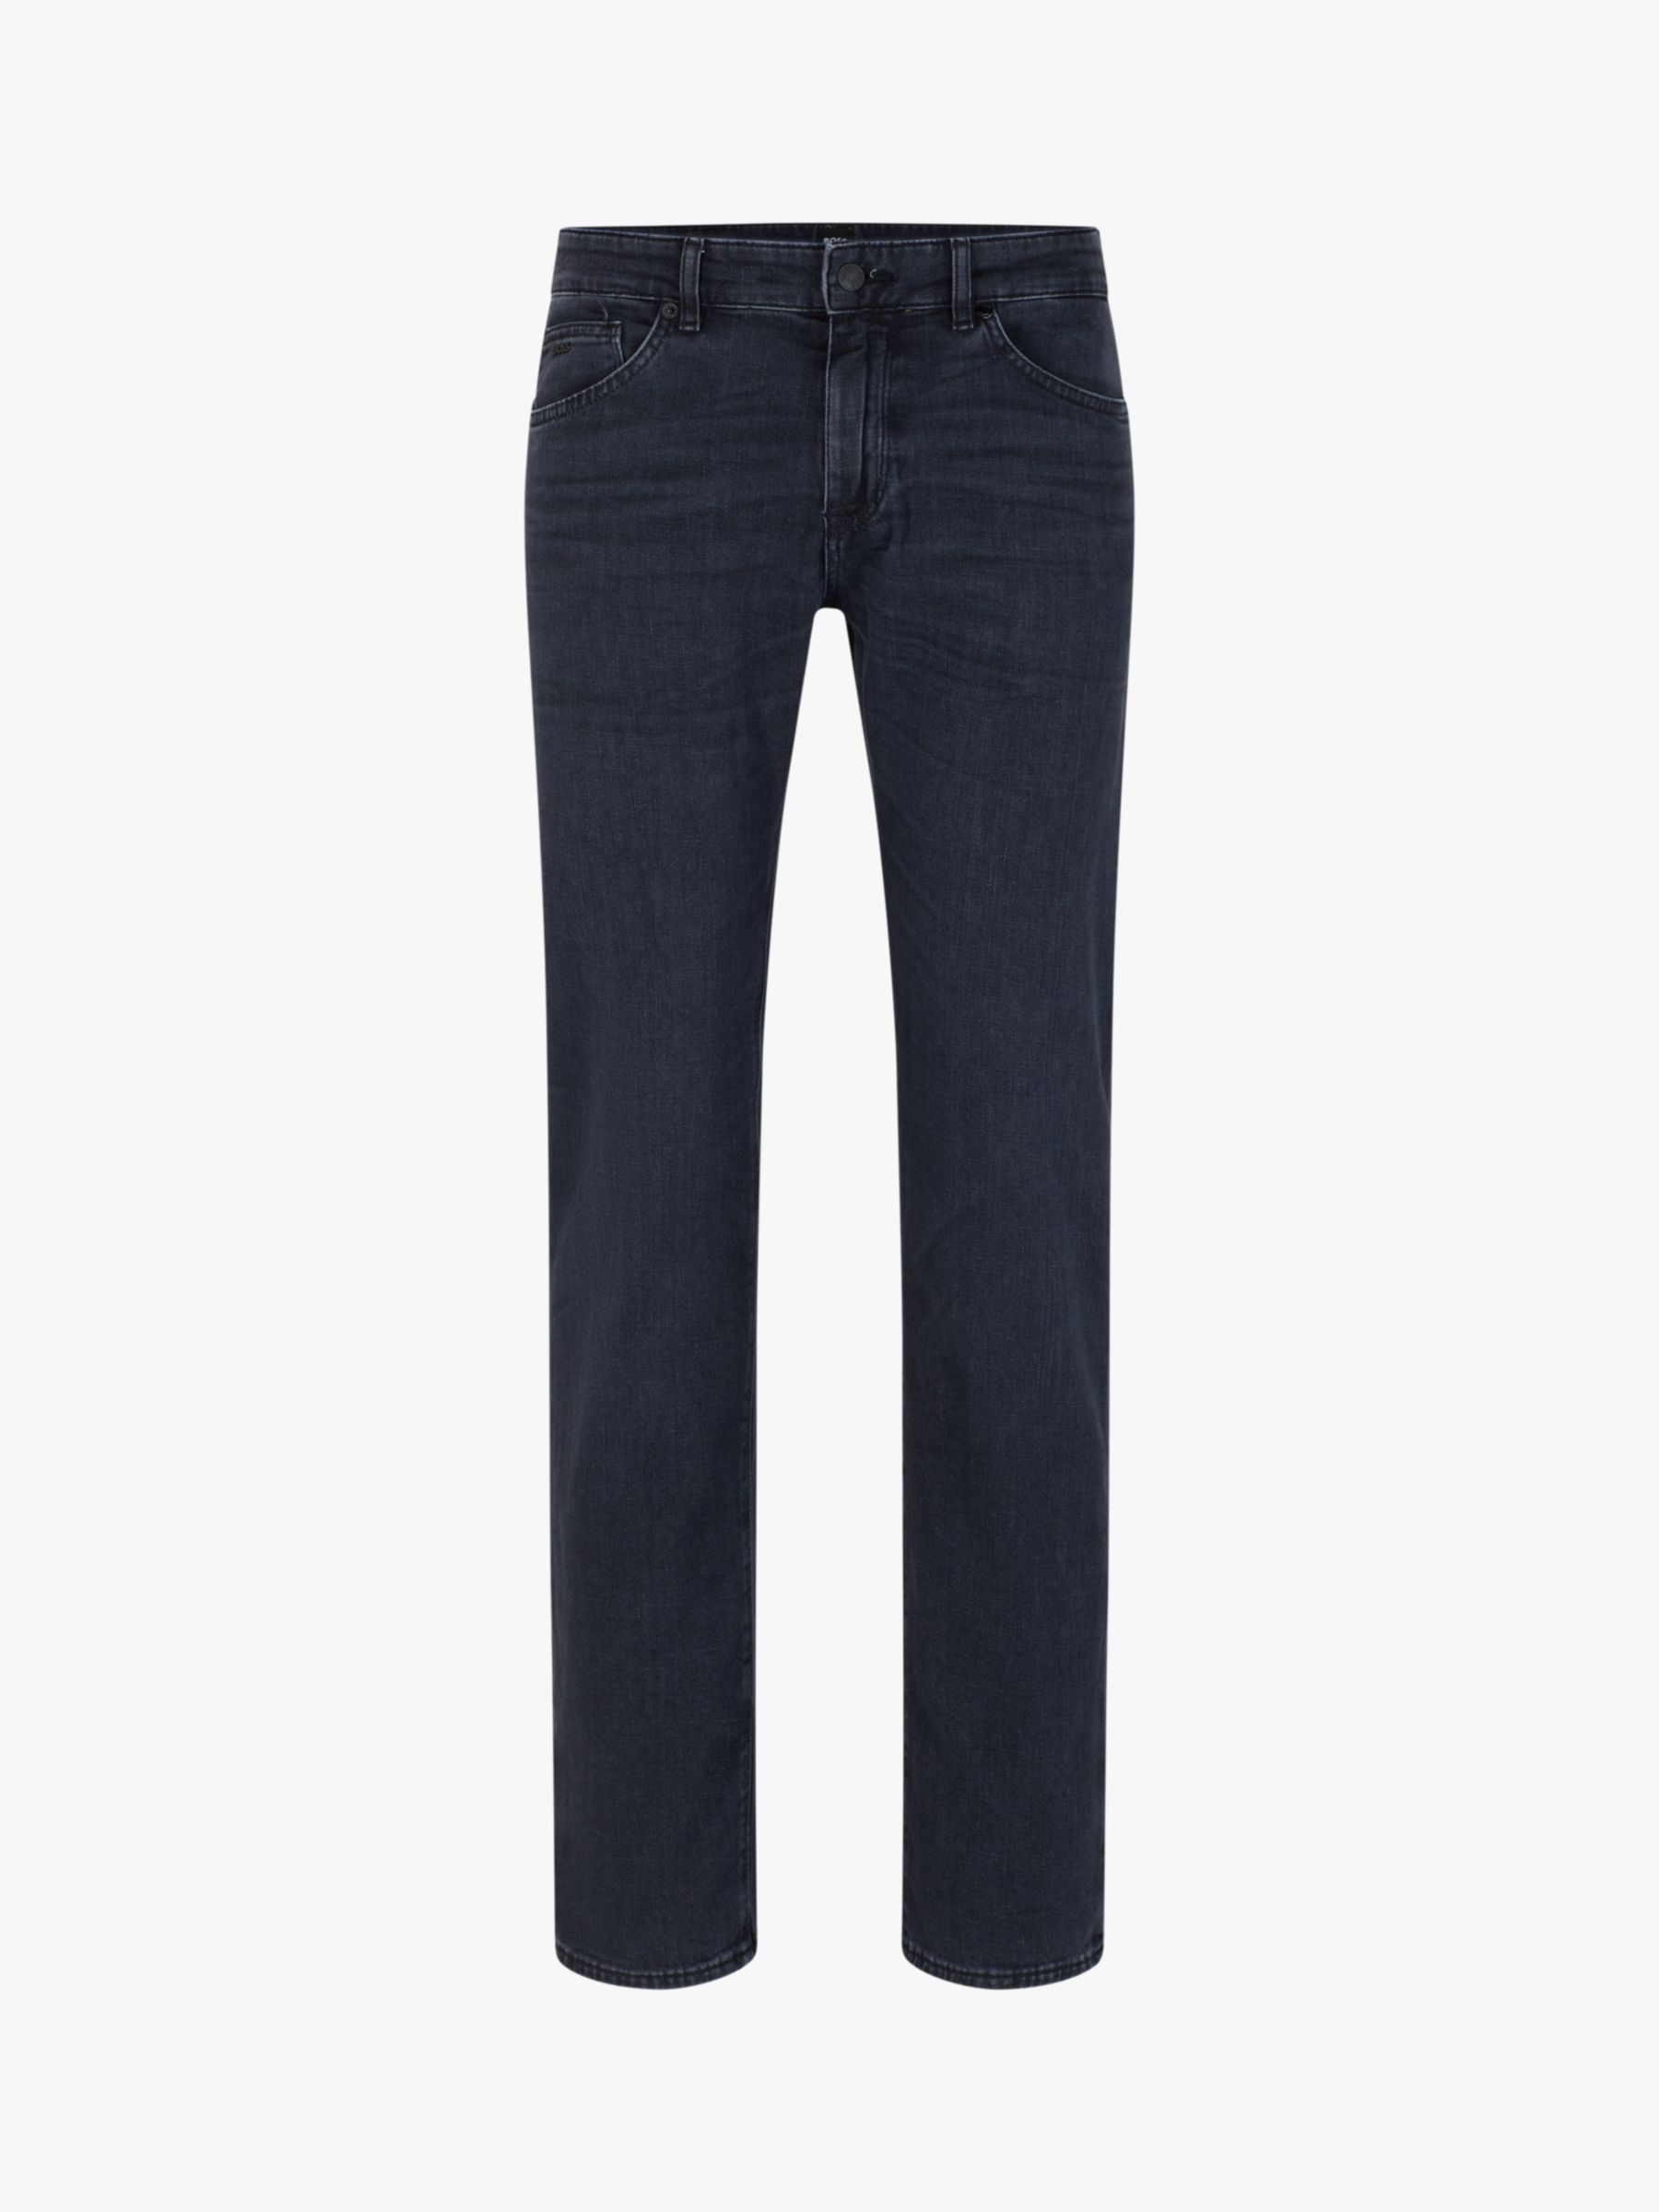 Optage Seraph Lydighed BOSS Maine Jeans, Charcoal at John Lewis & Partners